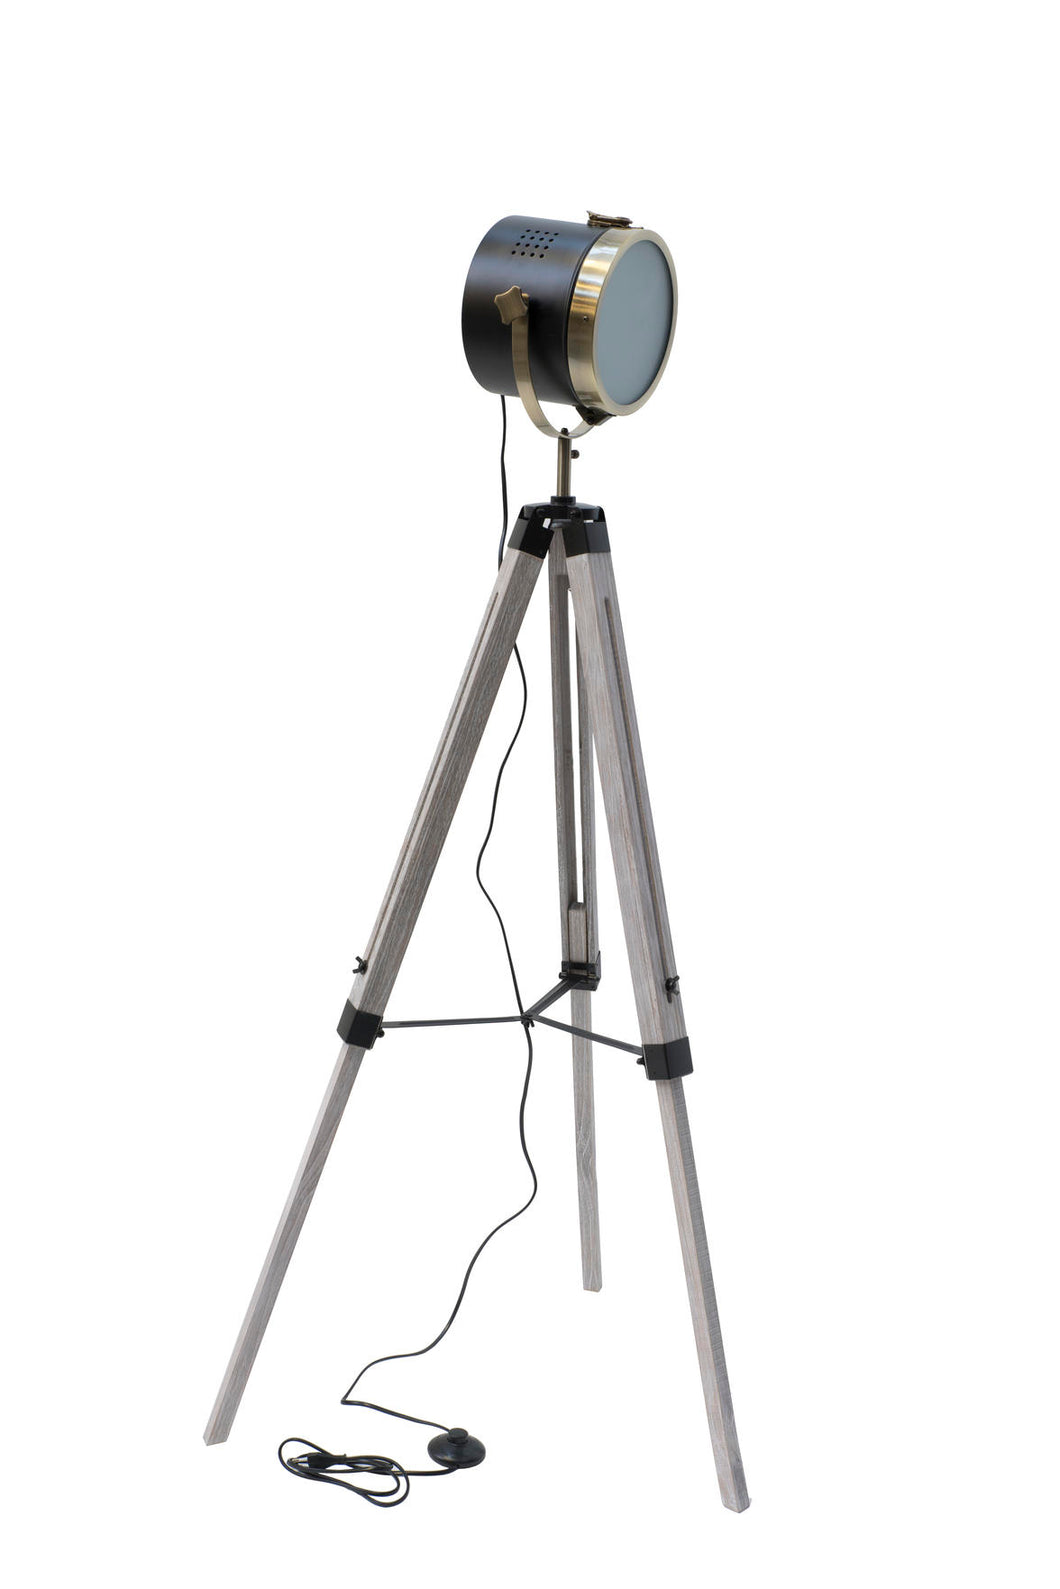 Orlando Store™ - Cinema - Lamp on Wooden and Metal Tripod